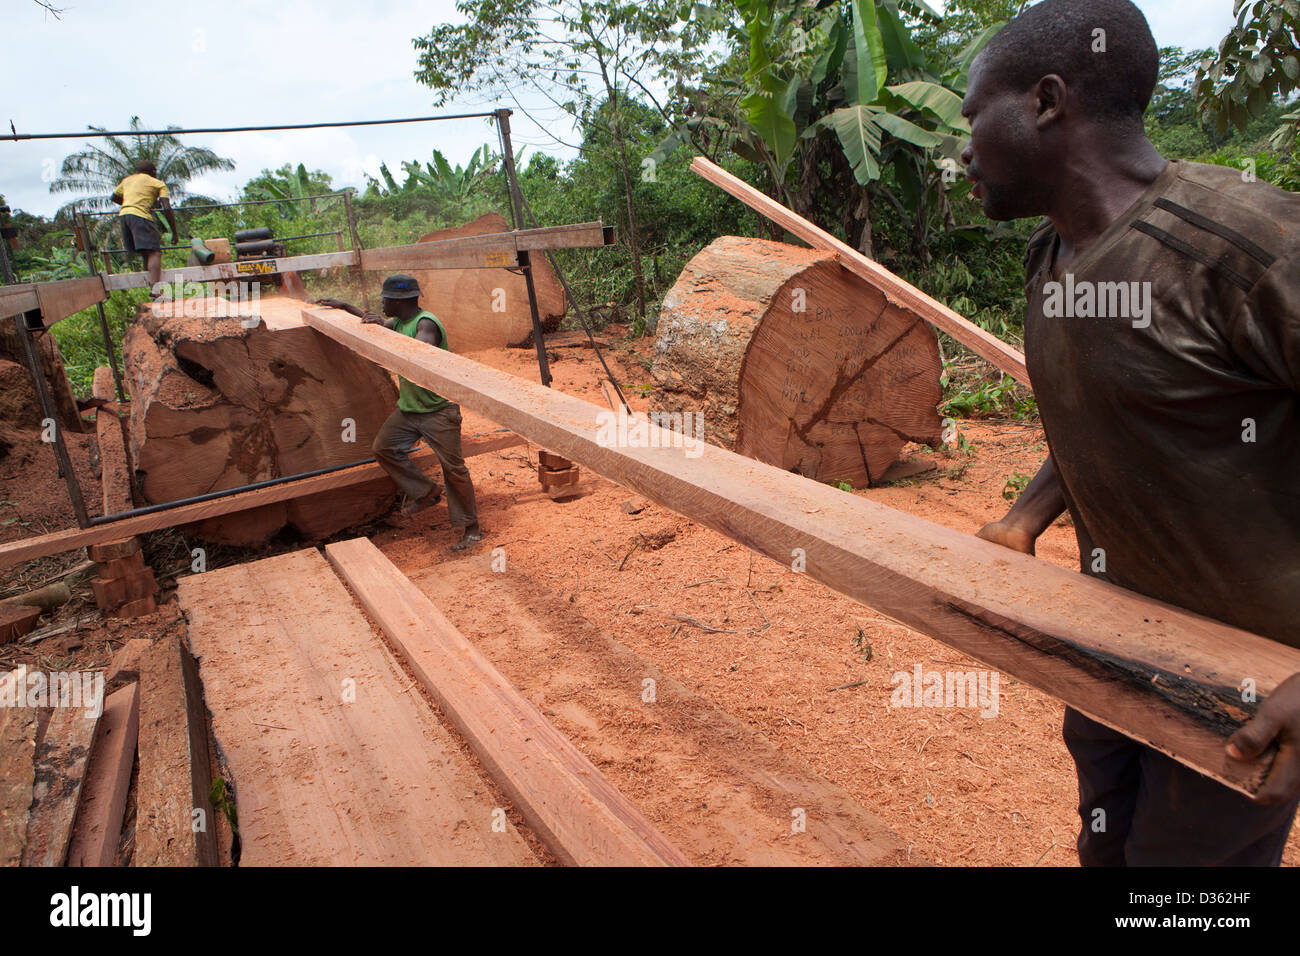 CAMEROON, 2nd October 2012: a mobile logging crew cut timber from a large hardwood tree. Stock Photo